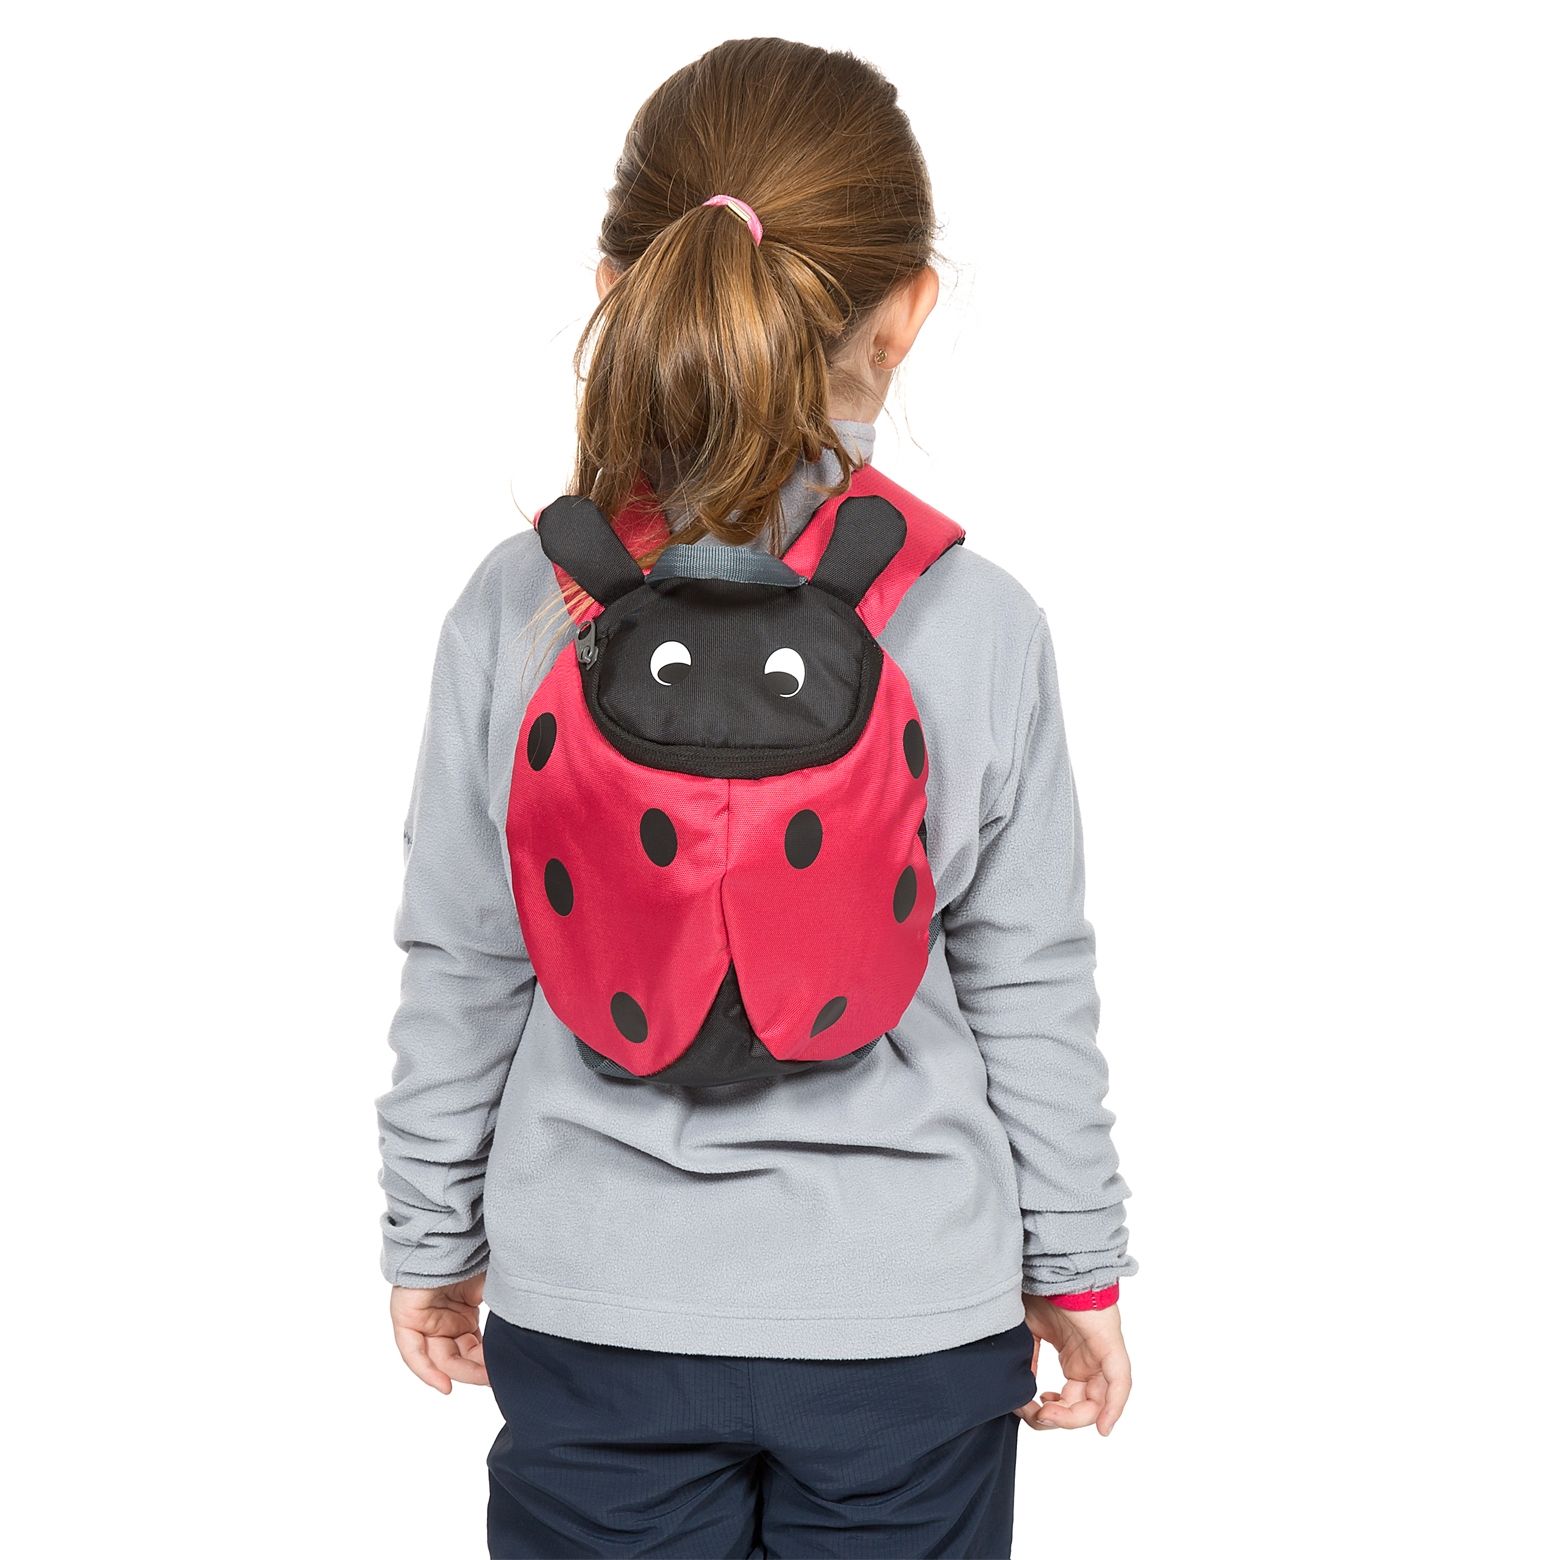 Ladybird Kids 3l Novelty Backpack With Reins